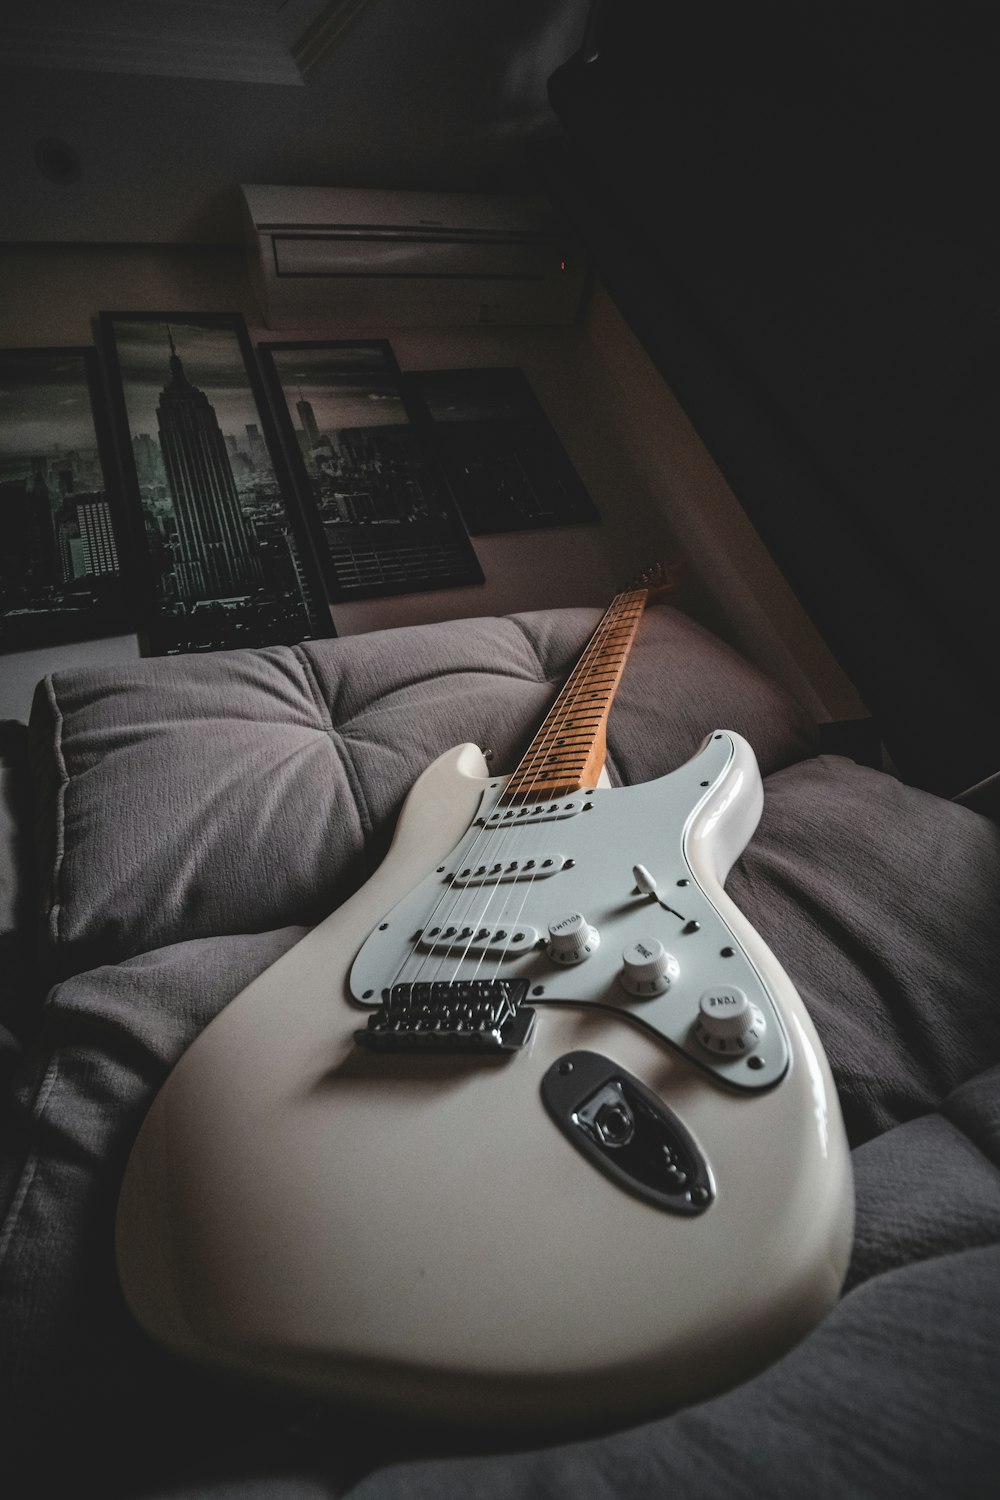 white electric guitar